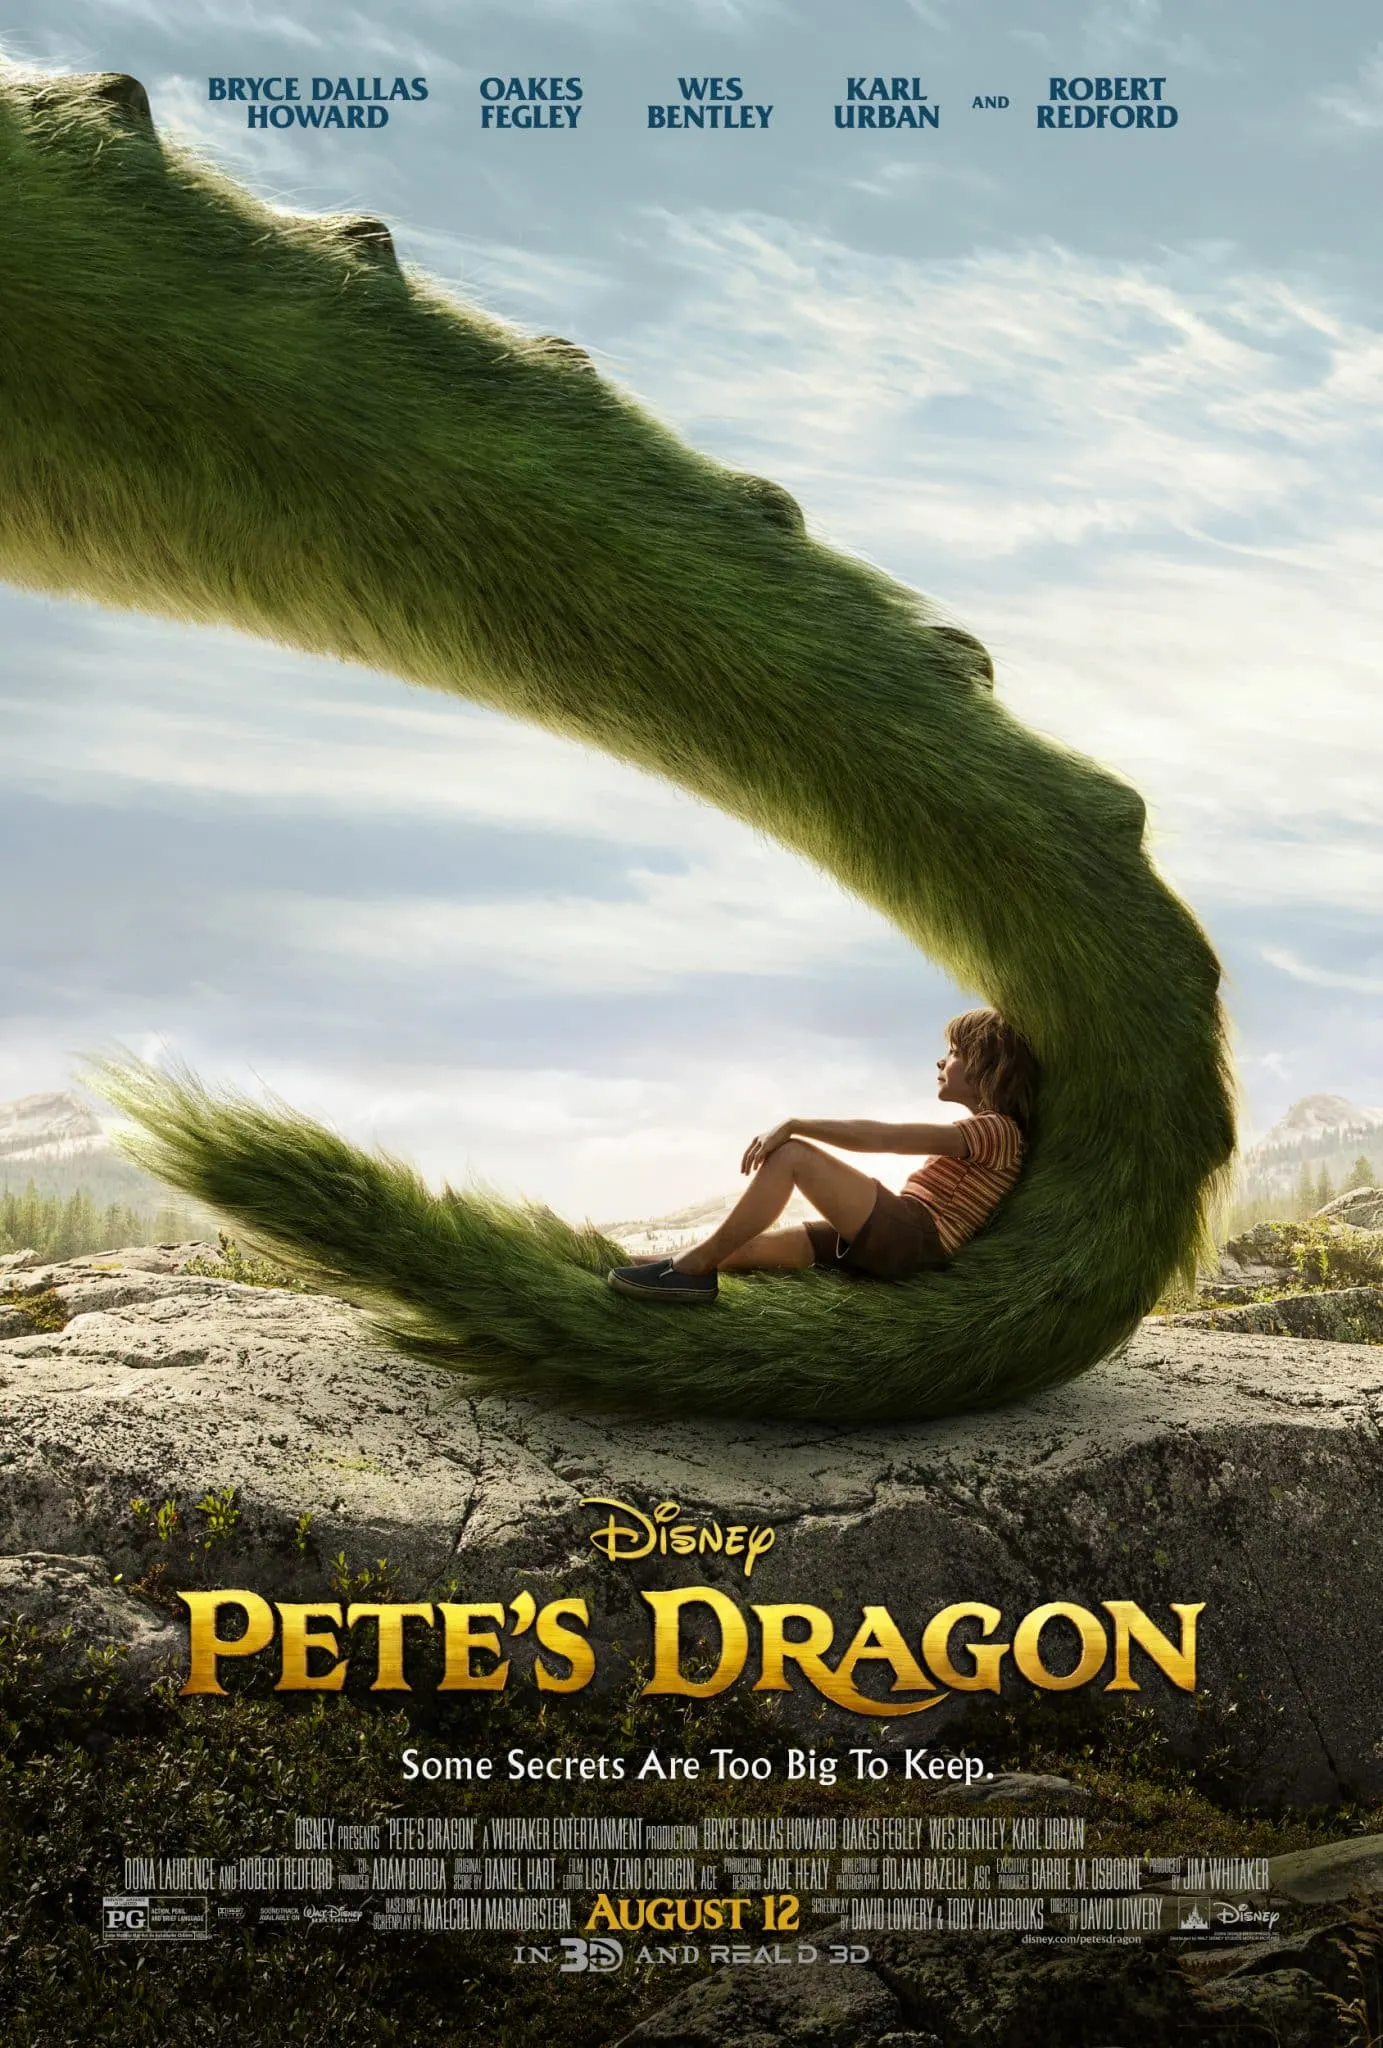 Disney's Pete's Dragon in Theaters August 12 | ThisNThatwithOlivia.com #PetesDragon